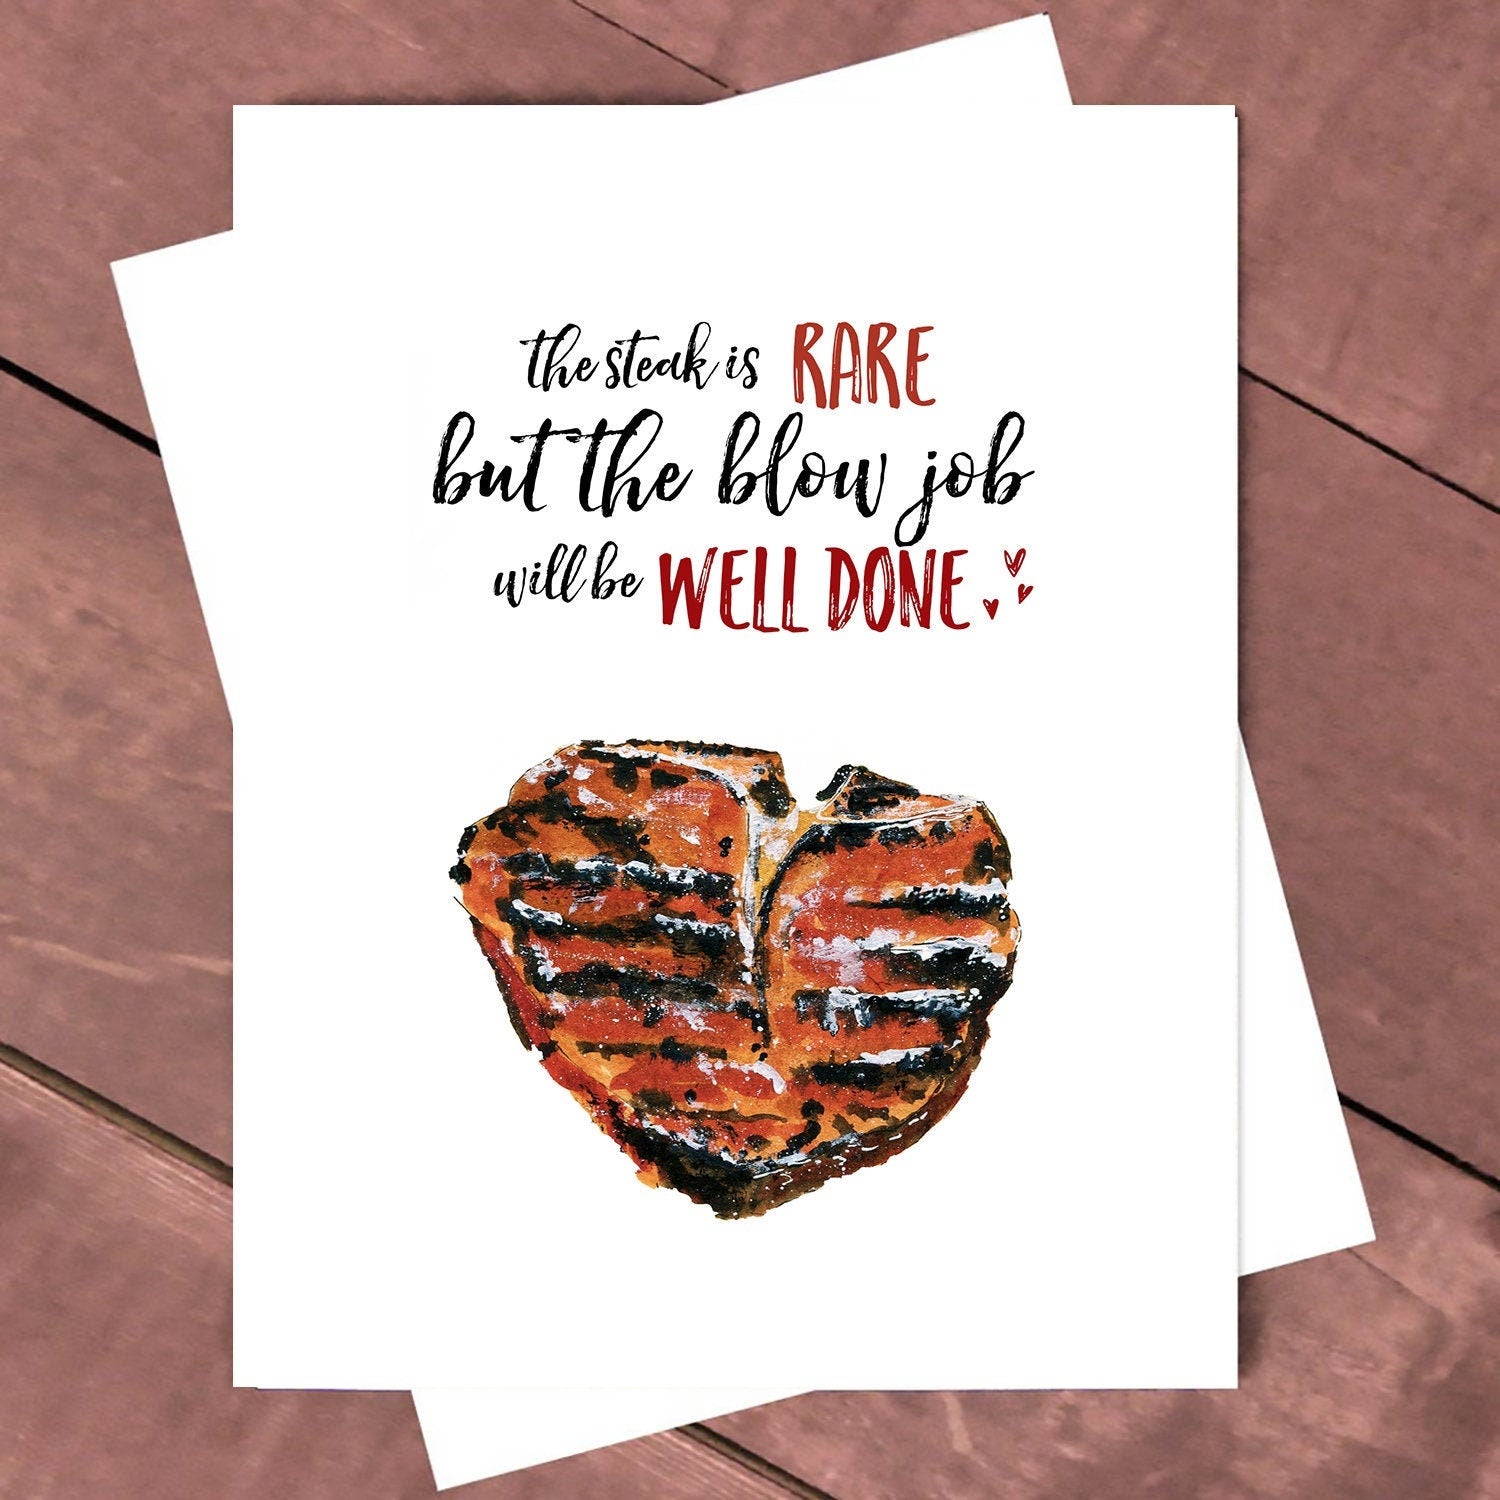 Steak and Blowjob Love Day Card For Boyfriend, Funny Steak Love Card For Him, Funny Love Card For Husband, Naughty Valentines Card